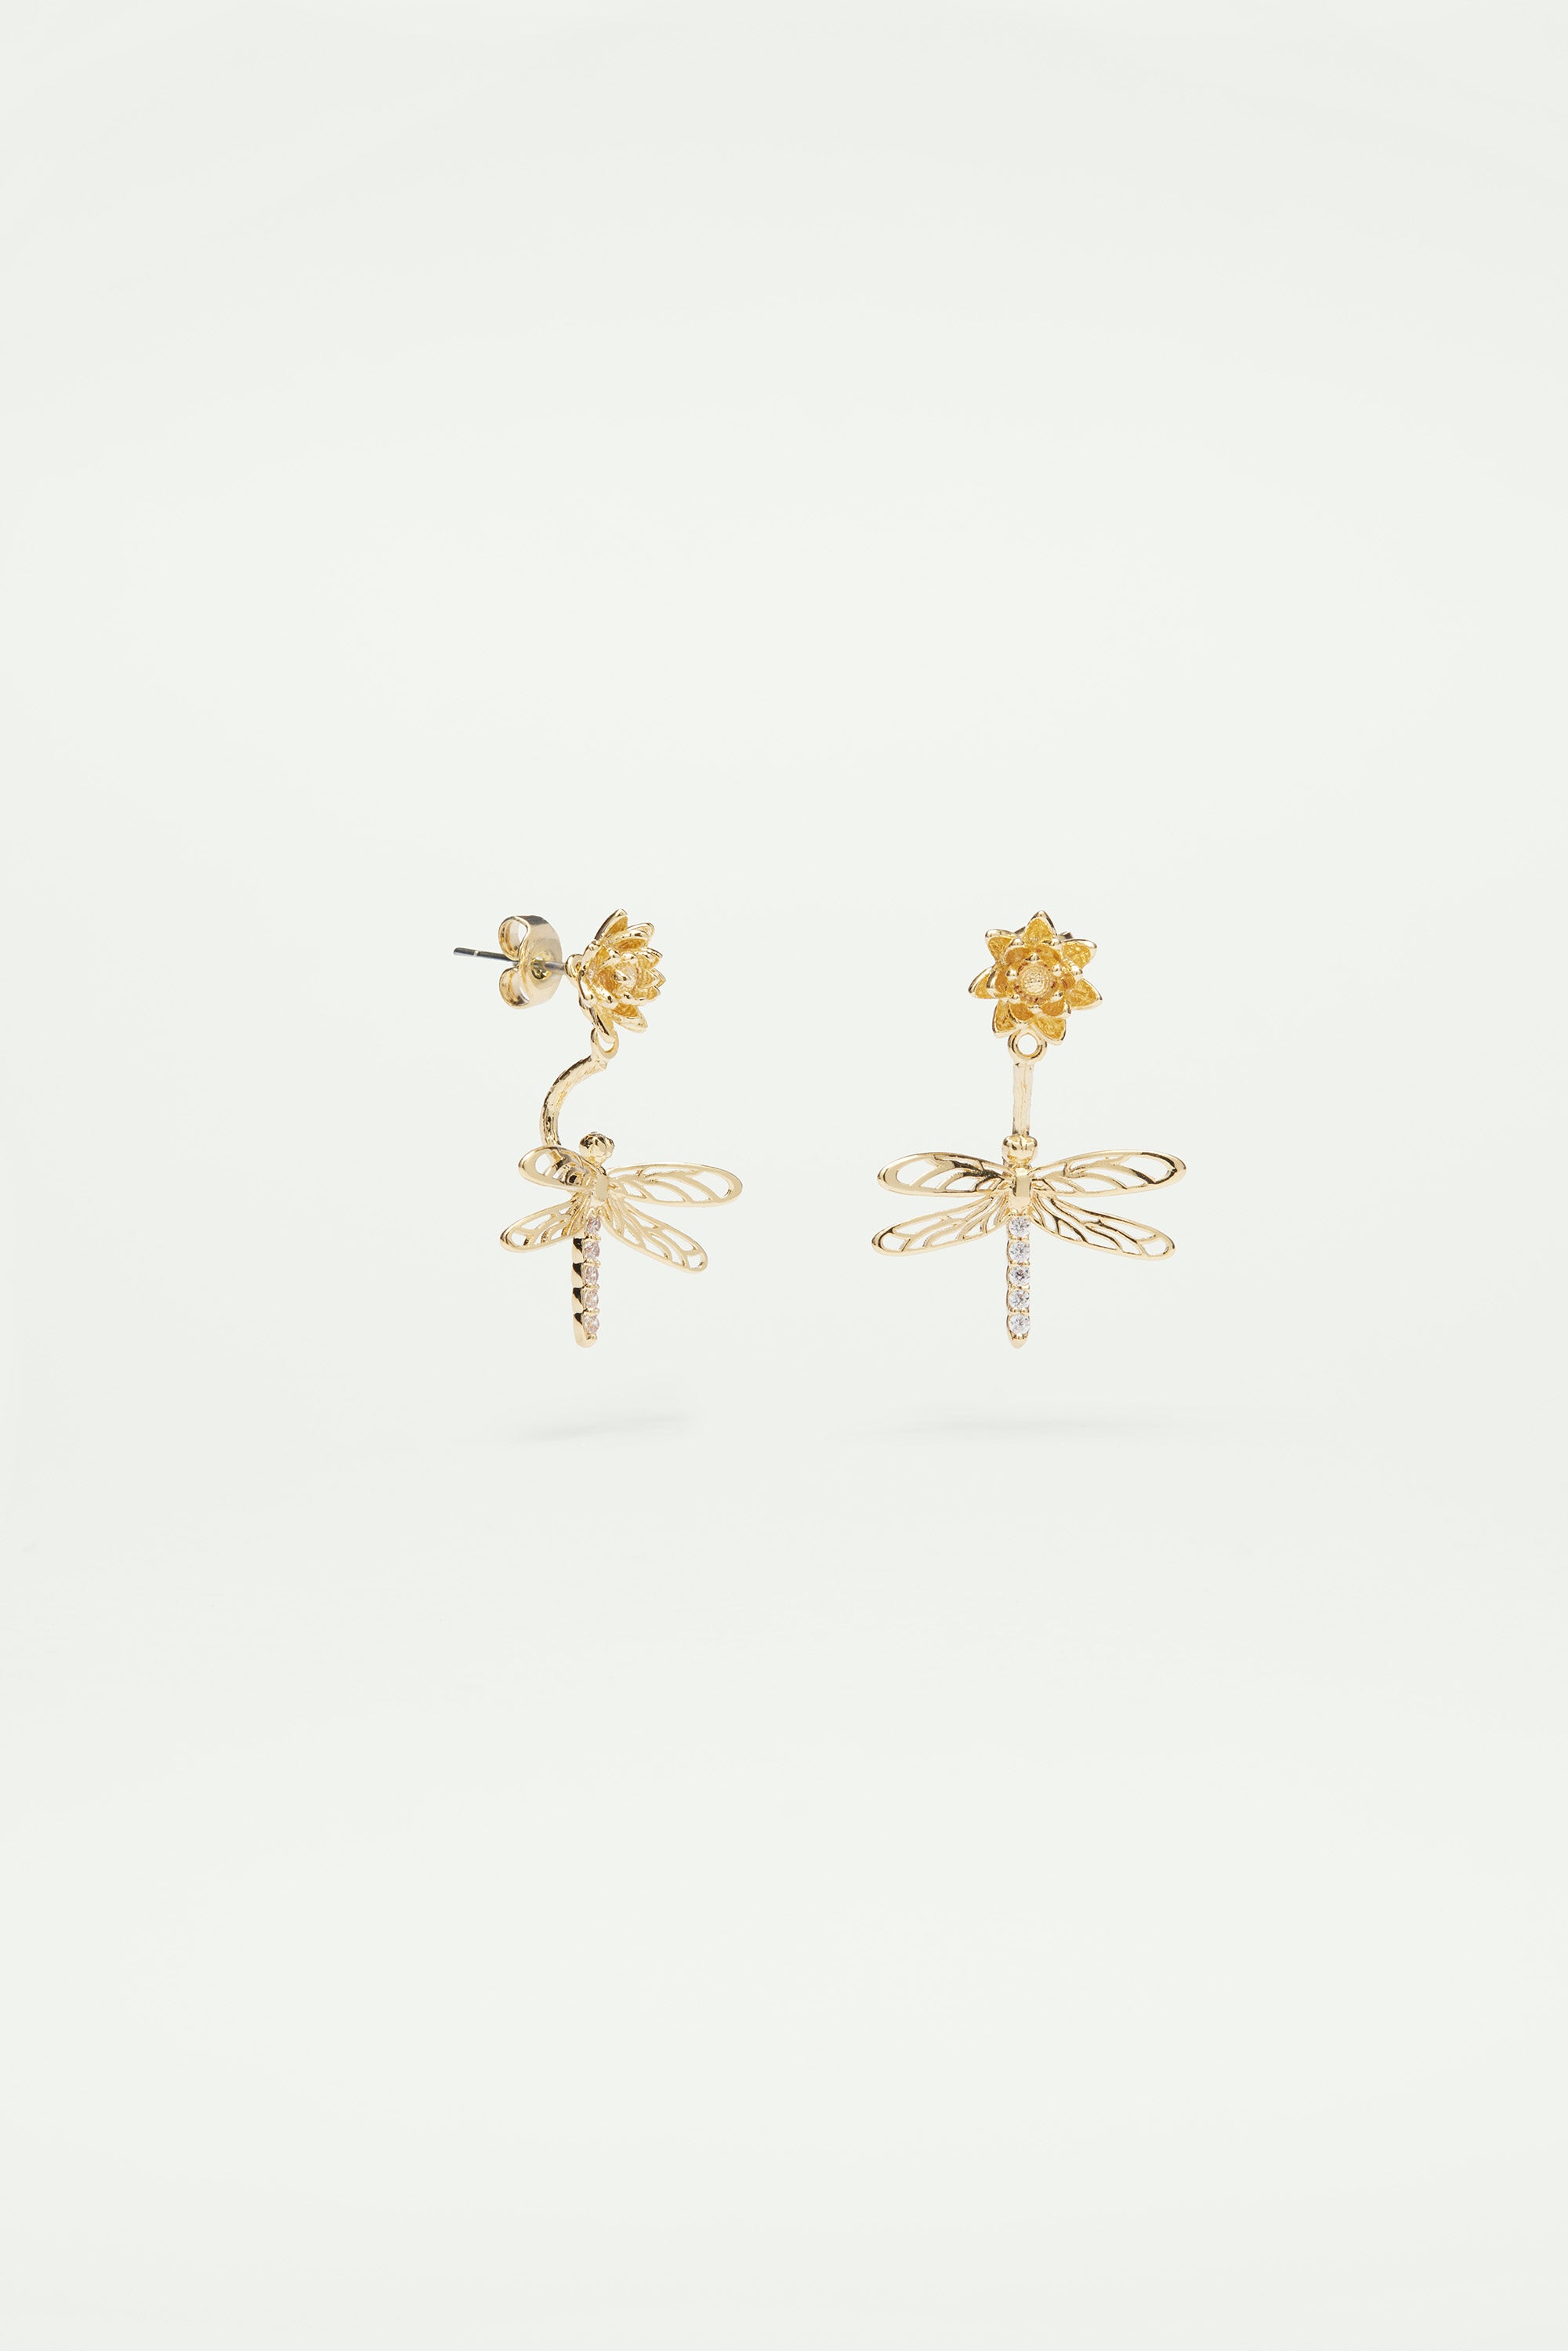 Dragonfly, flower and crystal dangling post earrings